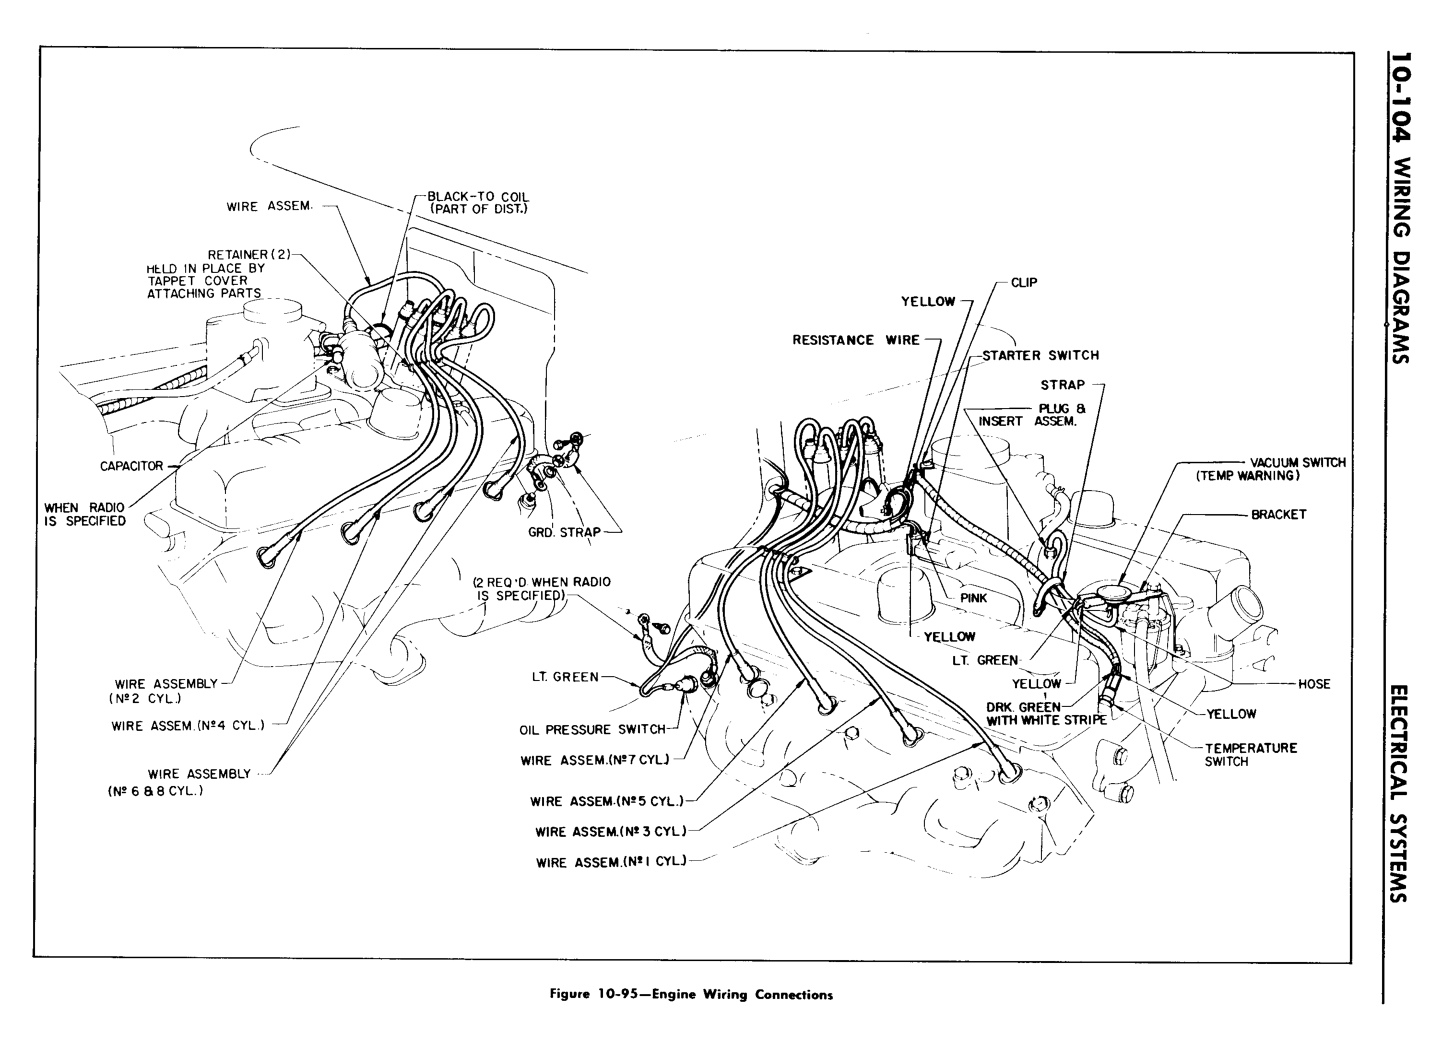 n_11 1960 Buick Shop Manual - Electrical Systems-104-104.jpg